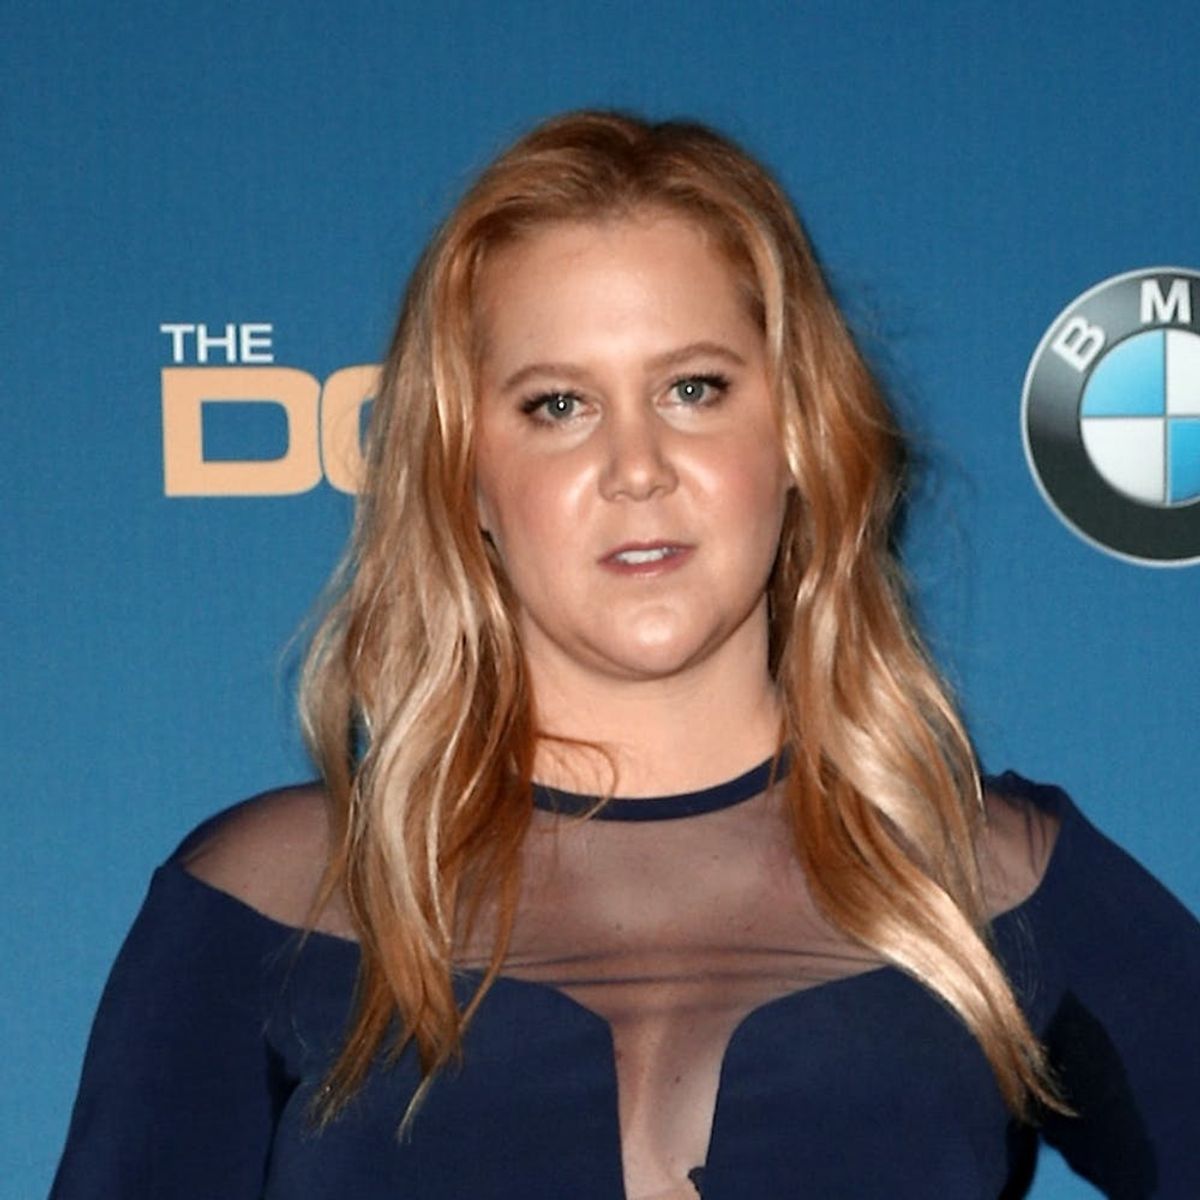 Amy Schumer Only Tried on 1 Wedding Dress Before Walking Down the Aisle